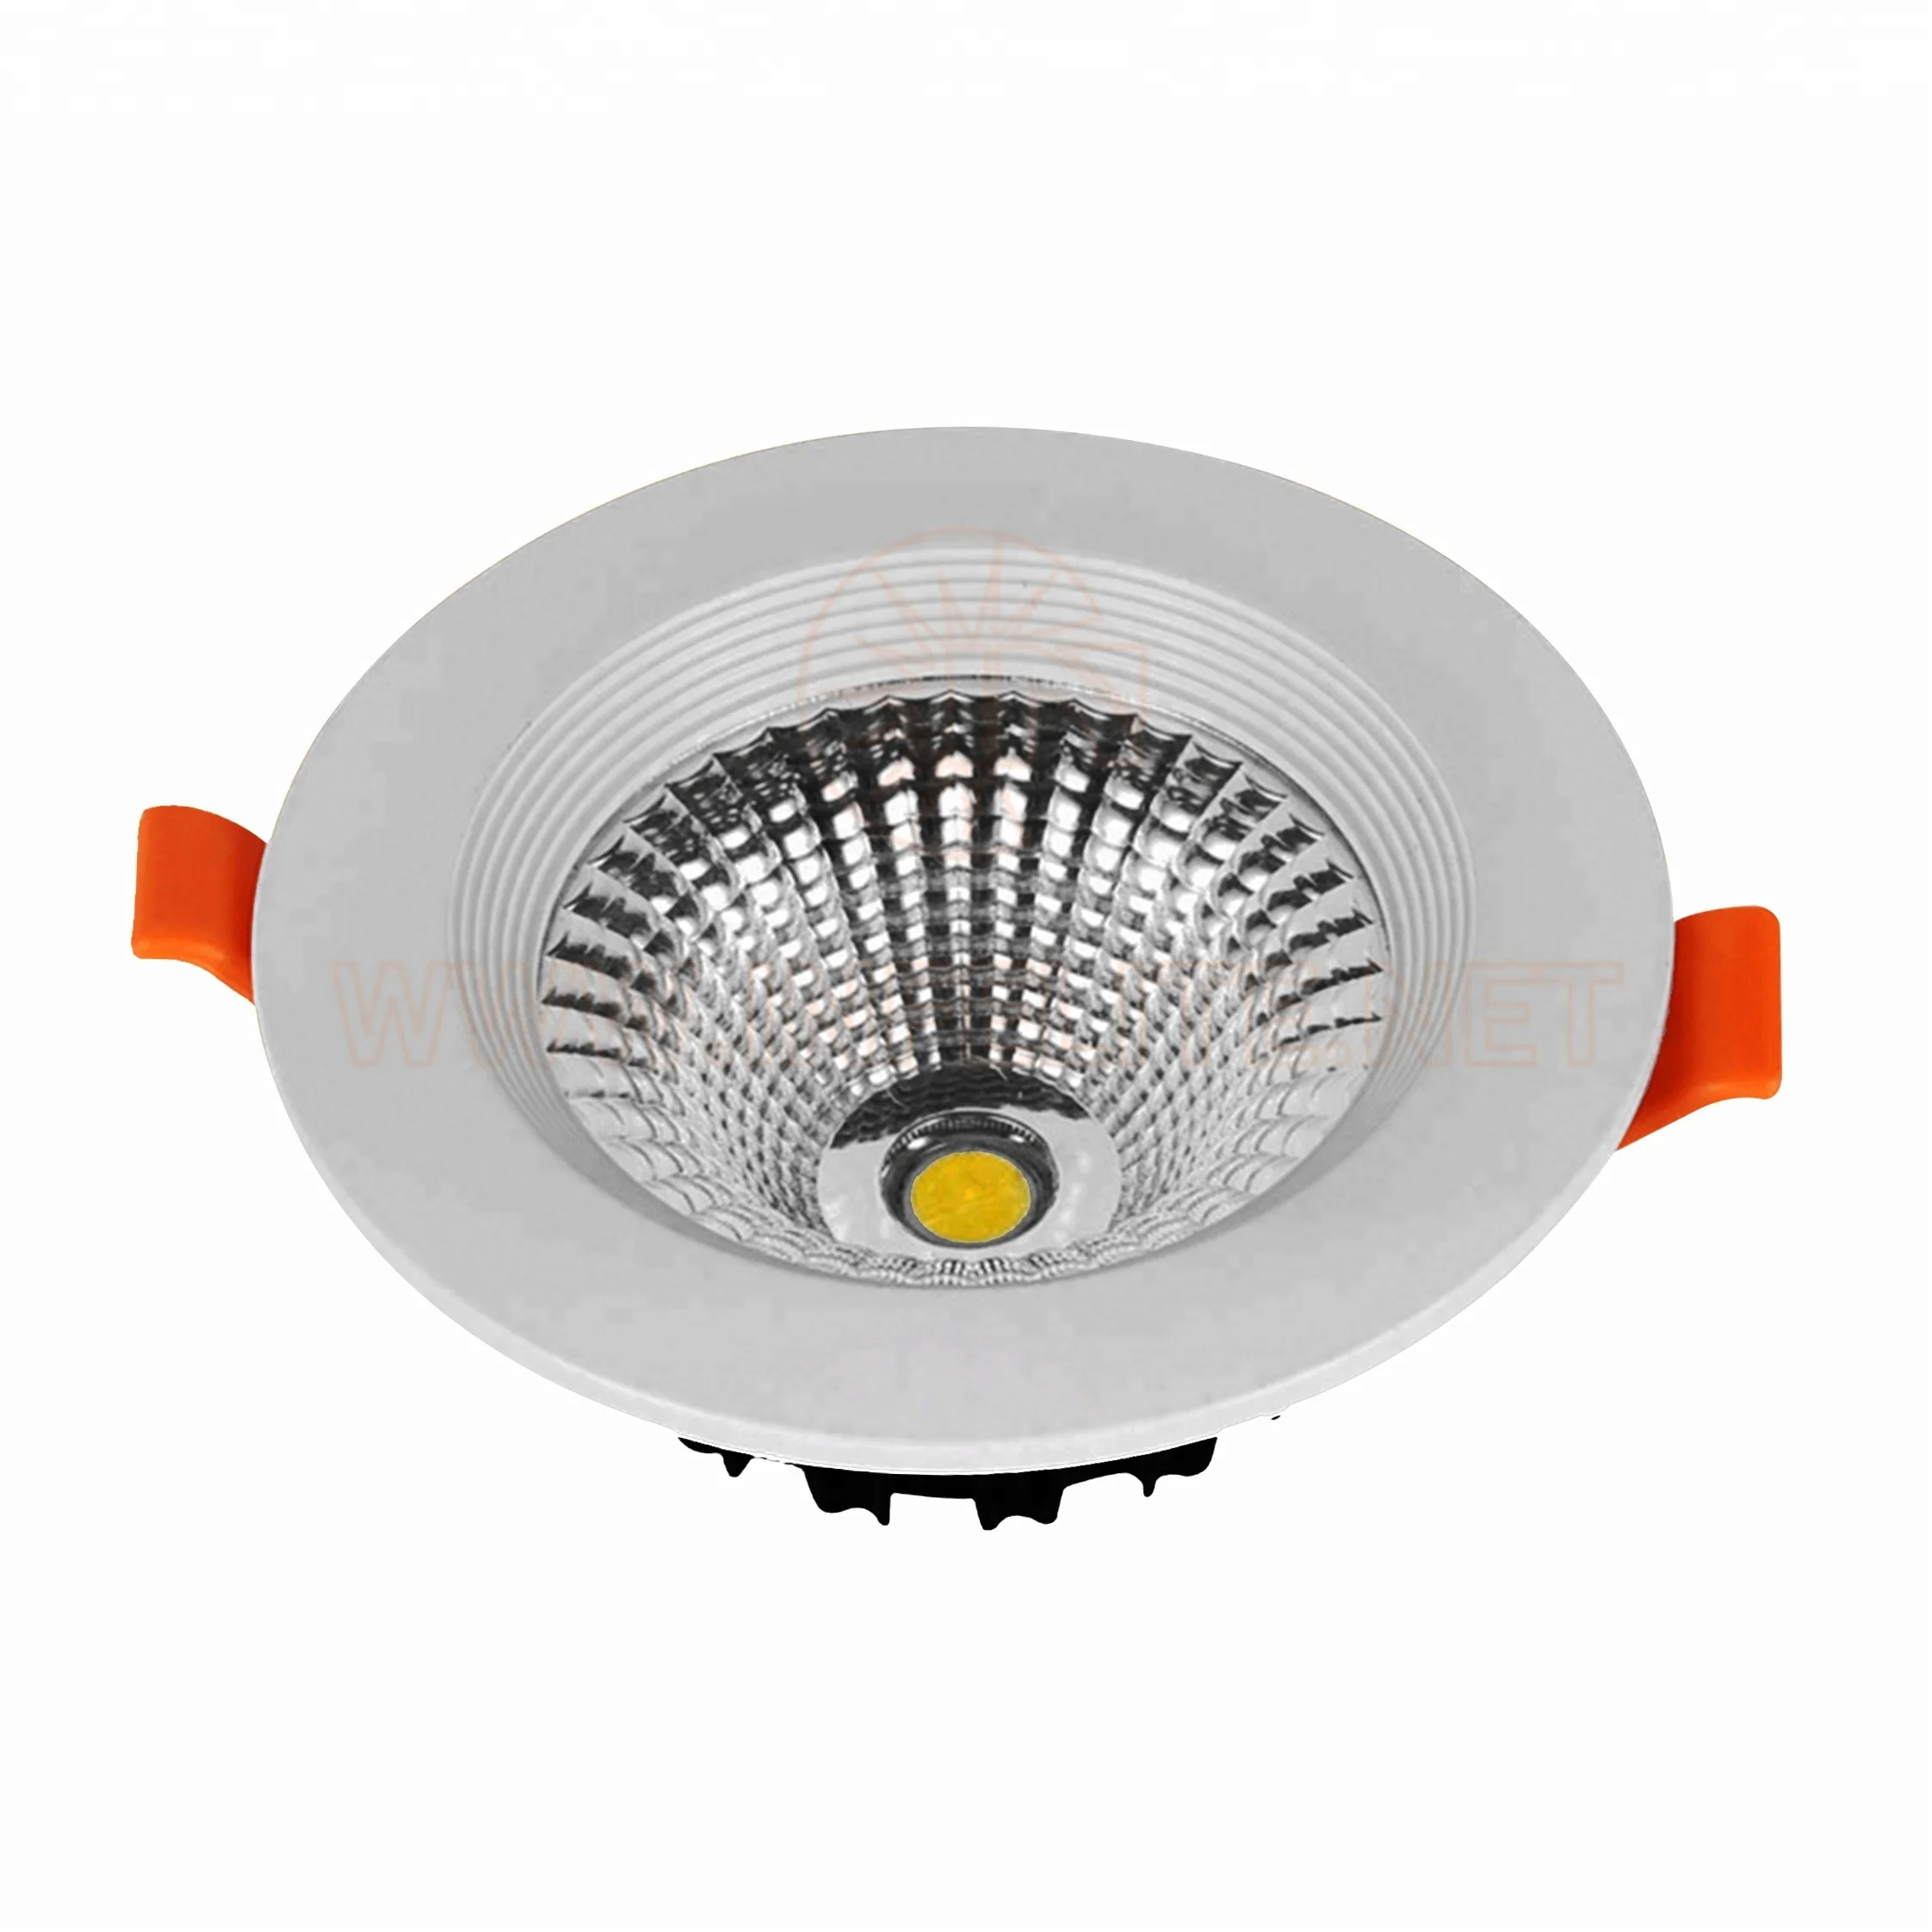 IN-DL106 Cold Forging 6063 Aluminum Round Recessed 5W 7W 10W 15W 18W 24W 30W COB LED Ceiling Downlight Down Light Lamp Fixture